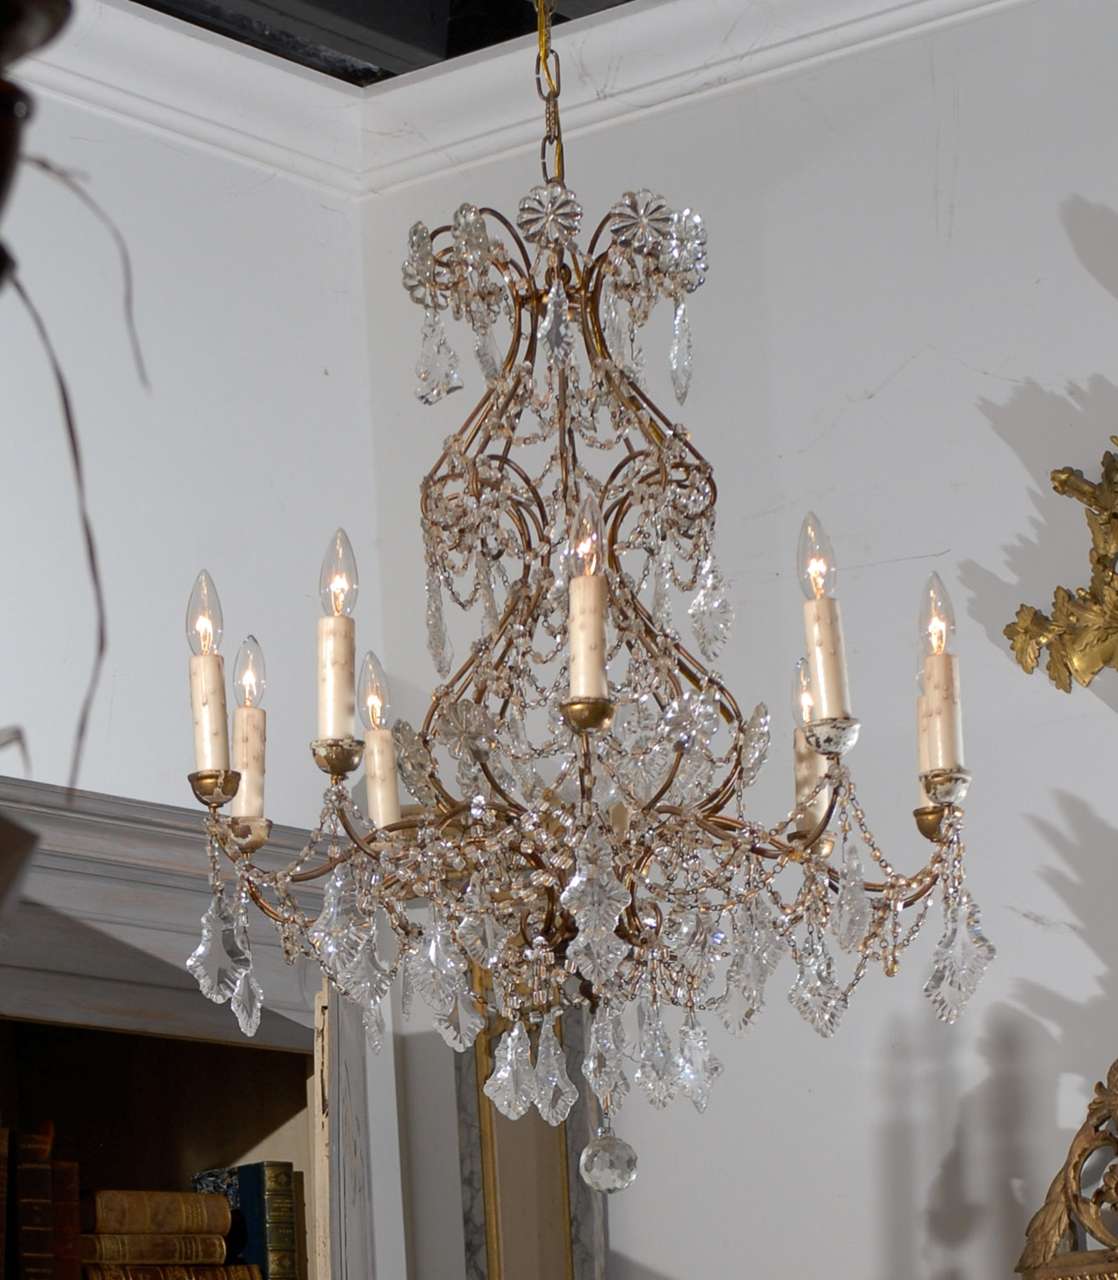 Italian 1850s Rococo Style Ten-Light Crystal Chandelier with Gilt Metal Armature For Sale 3